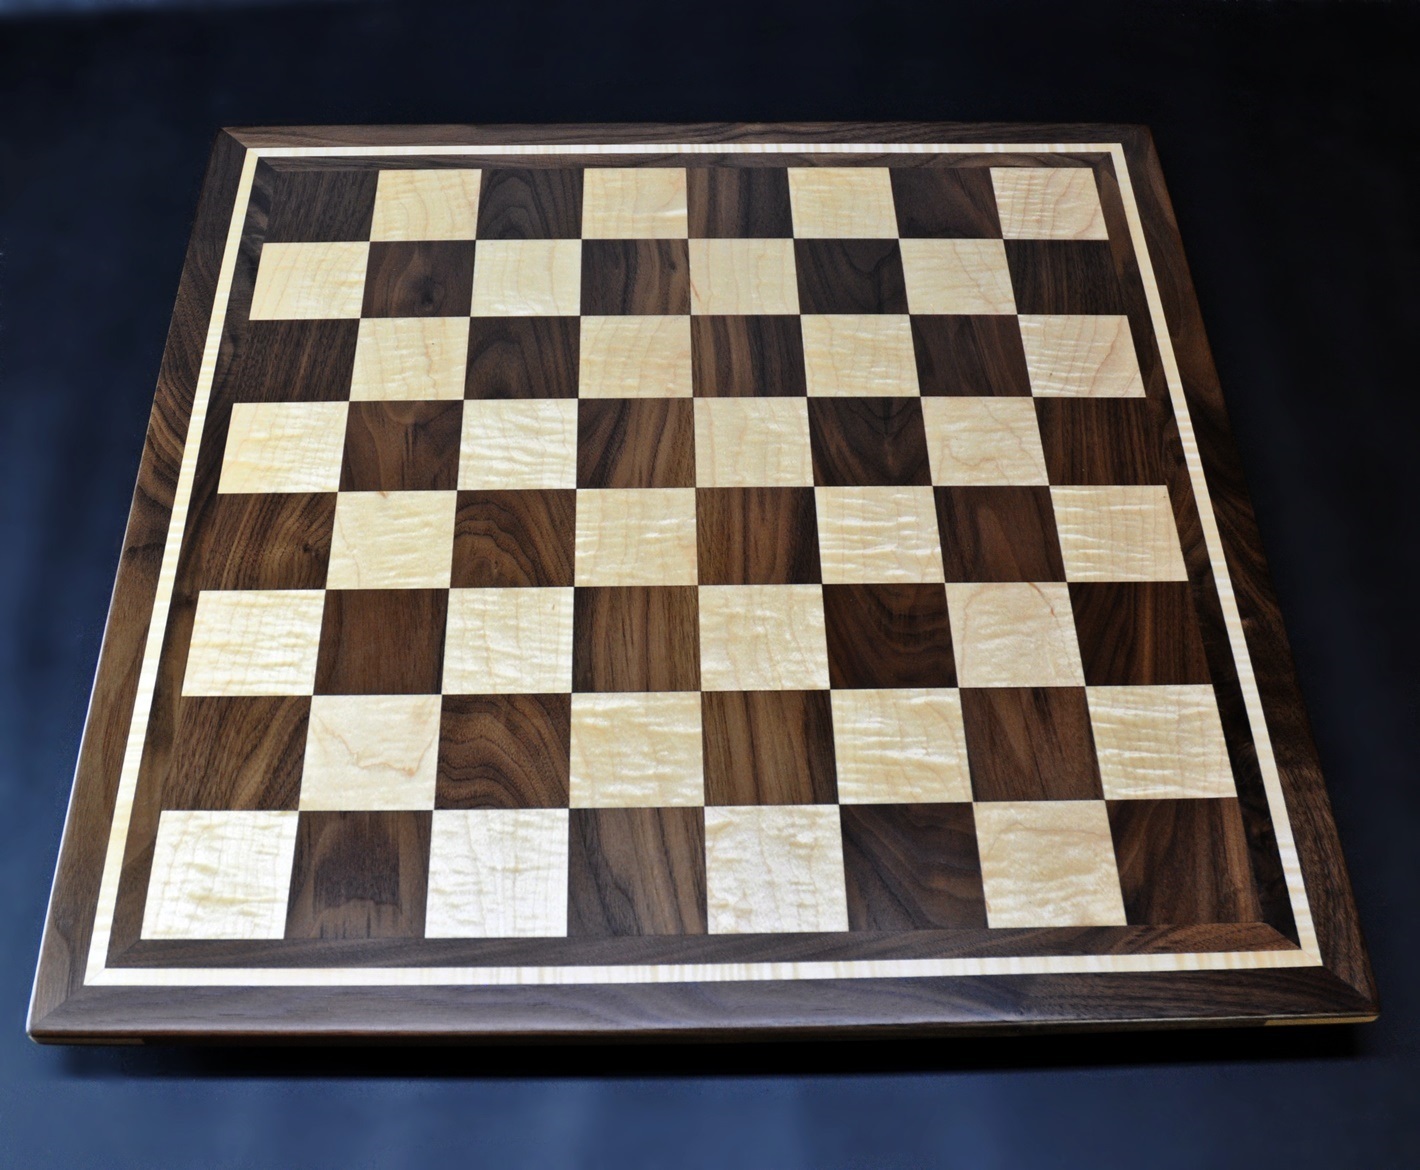 New Chox Chess SMALL 11 Inch BOARD ONLY Maple Walnut Inlaid Wood Flat Game Set 